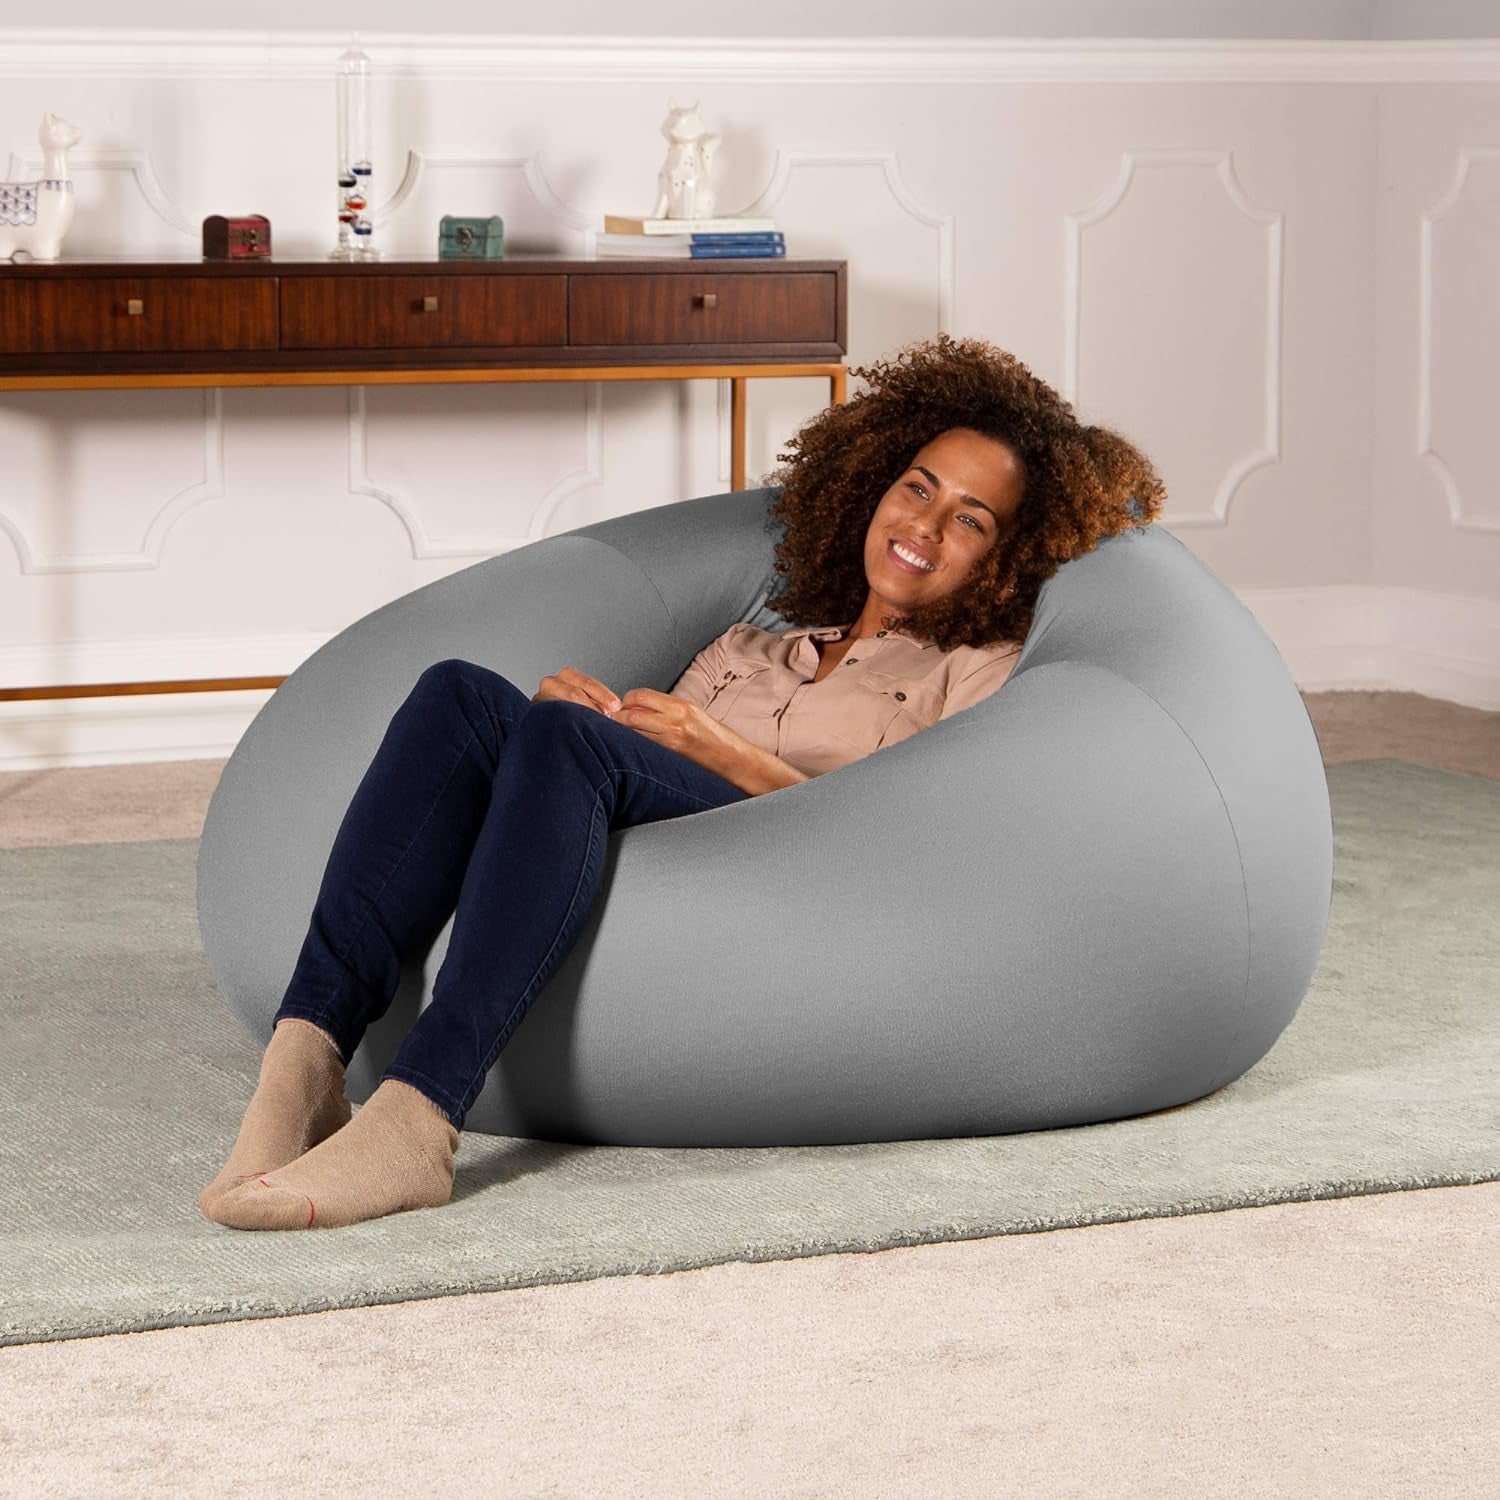 Nimbus Spandex Bean Bag Chair for Adults-Furniture for Rec, Family Rooms and More, Large, Silver